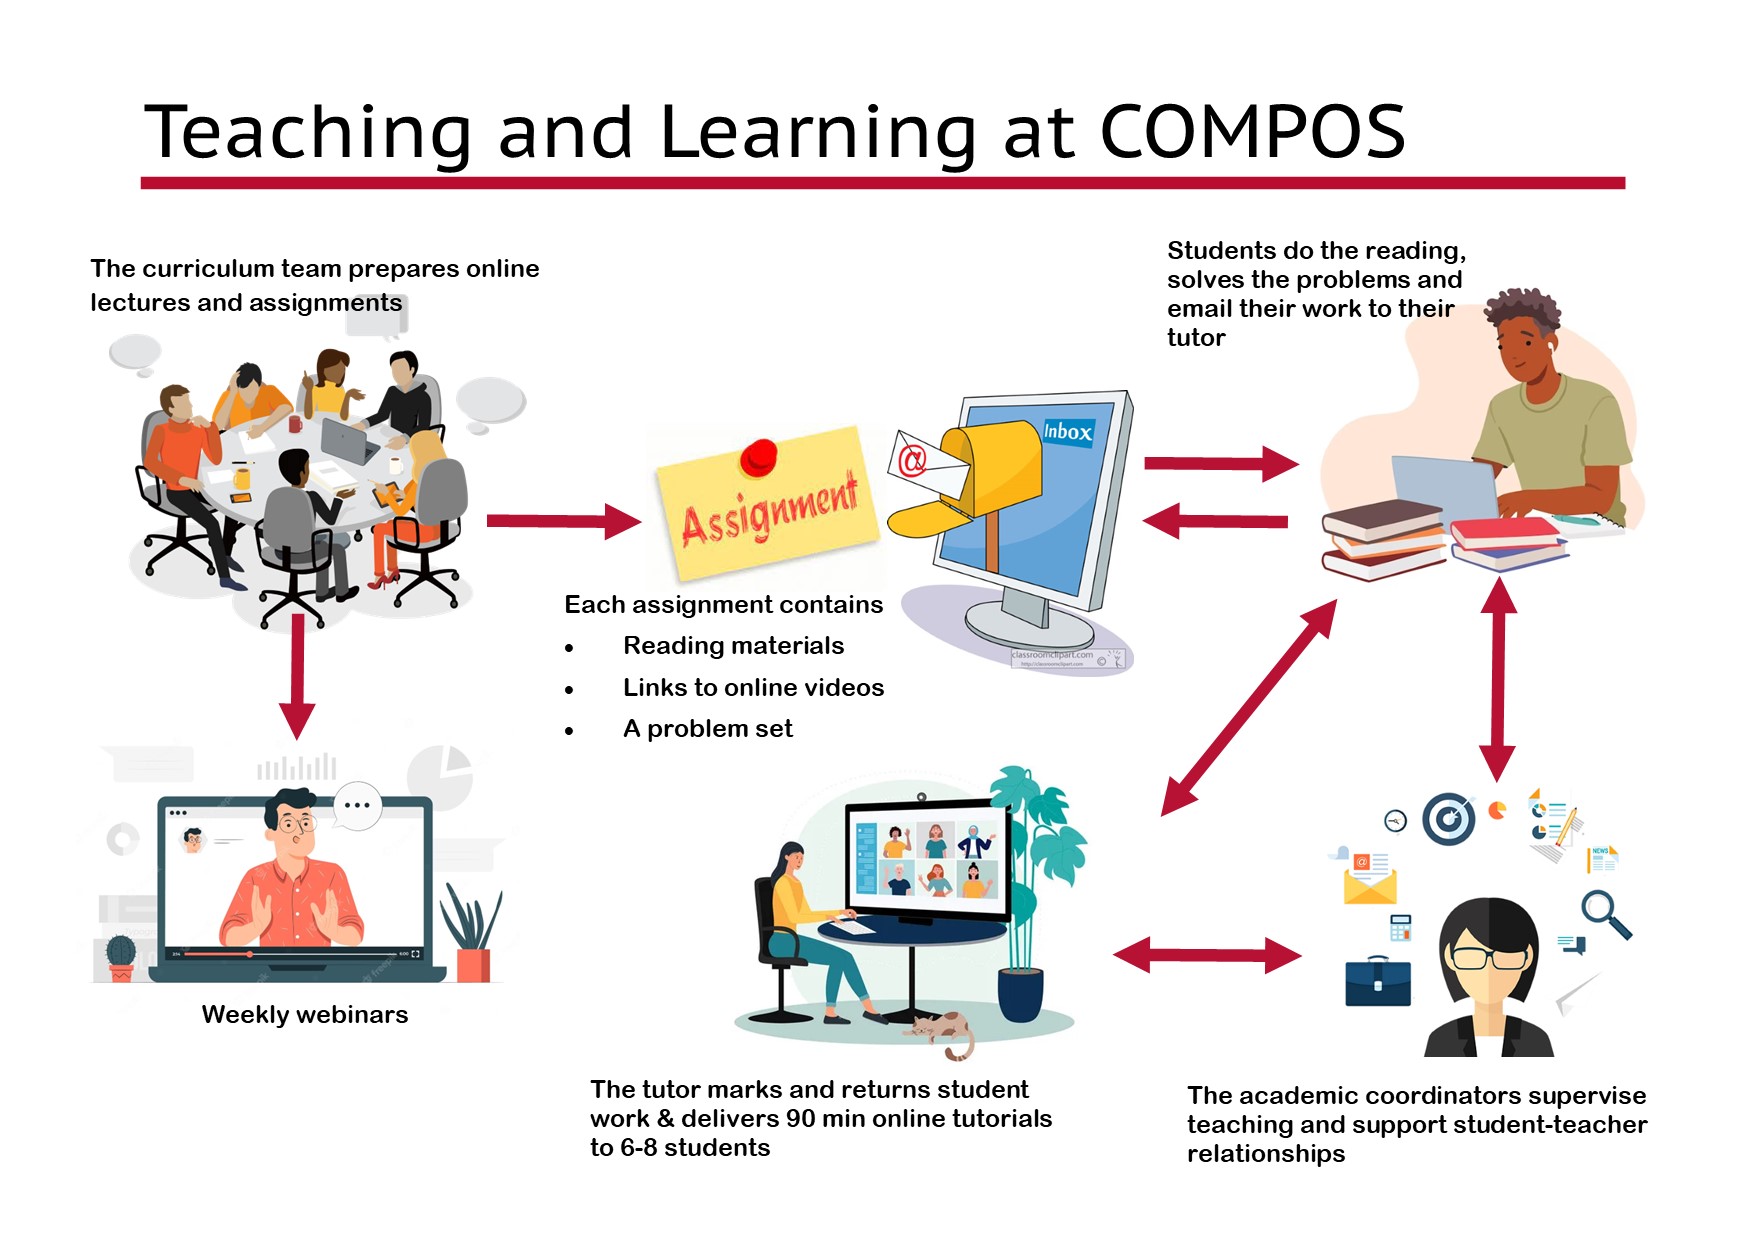 a pictorial flowchart showing how COMPOS works